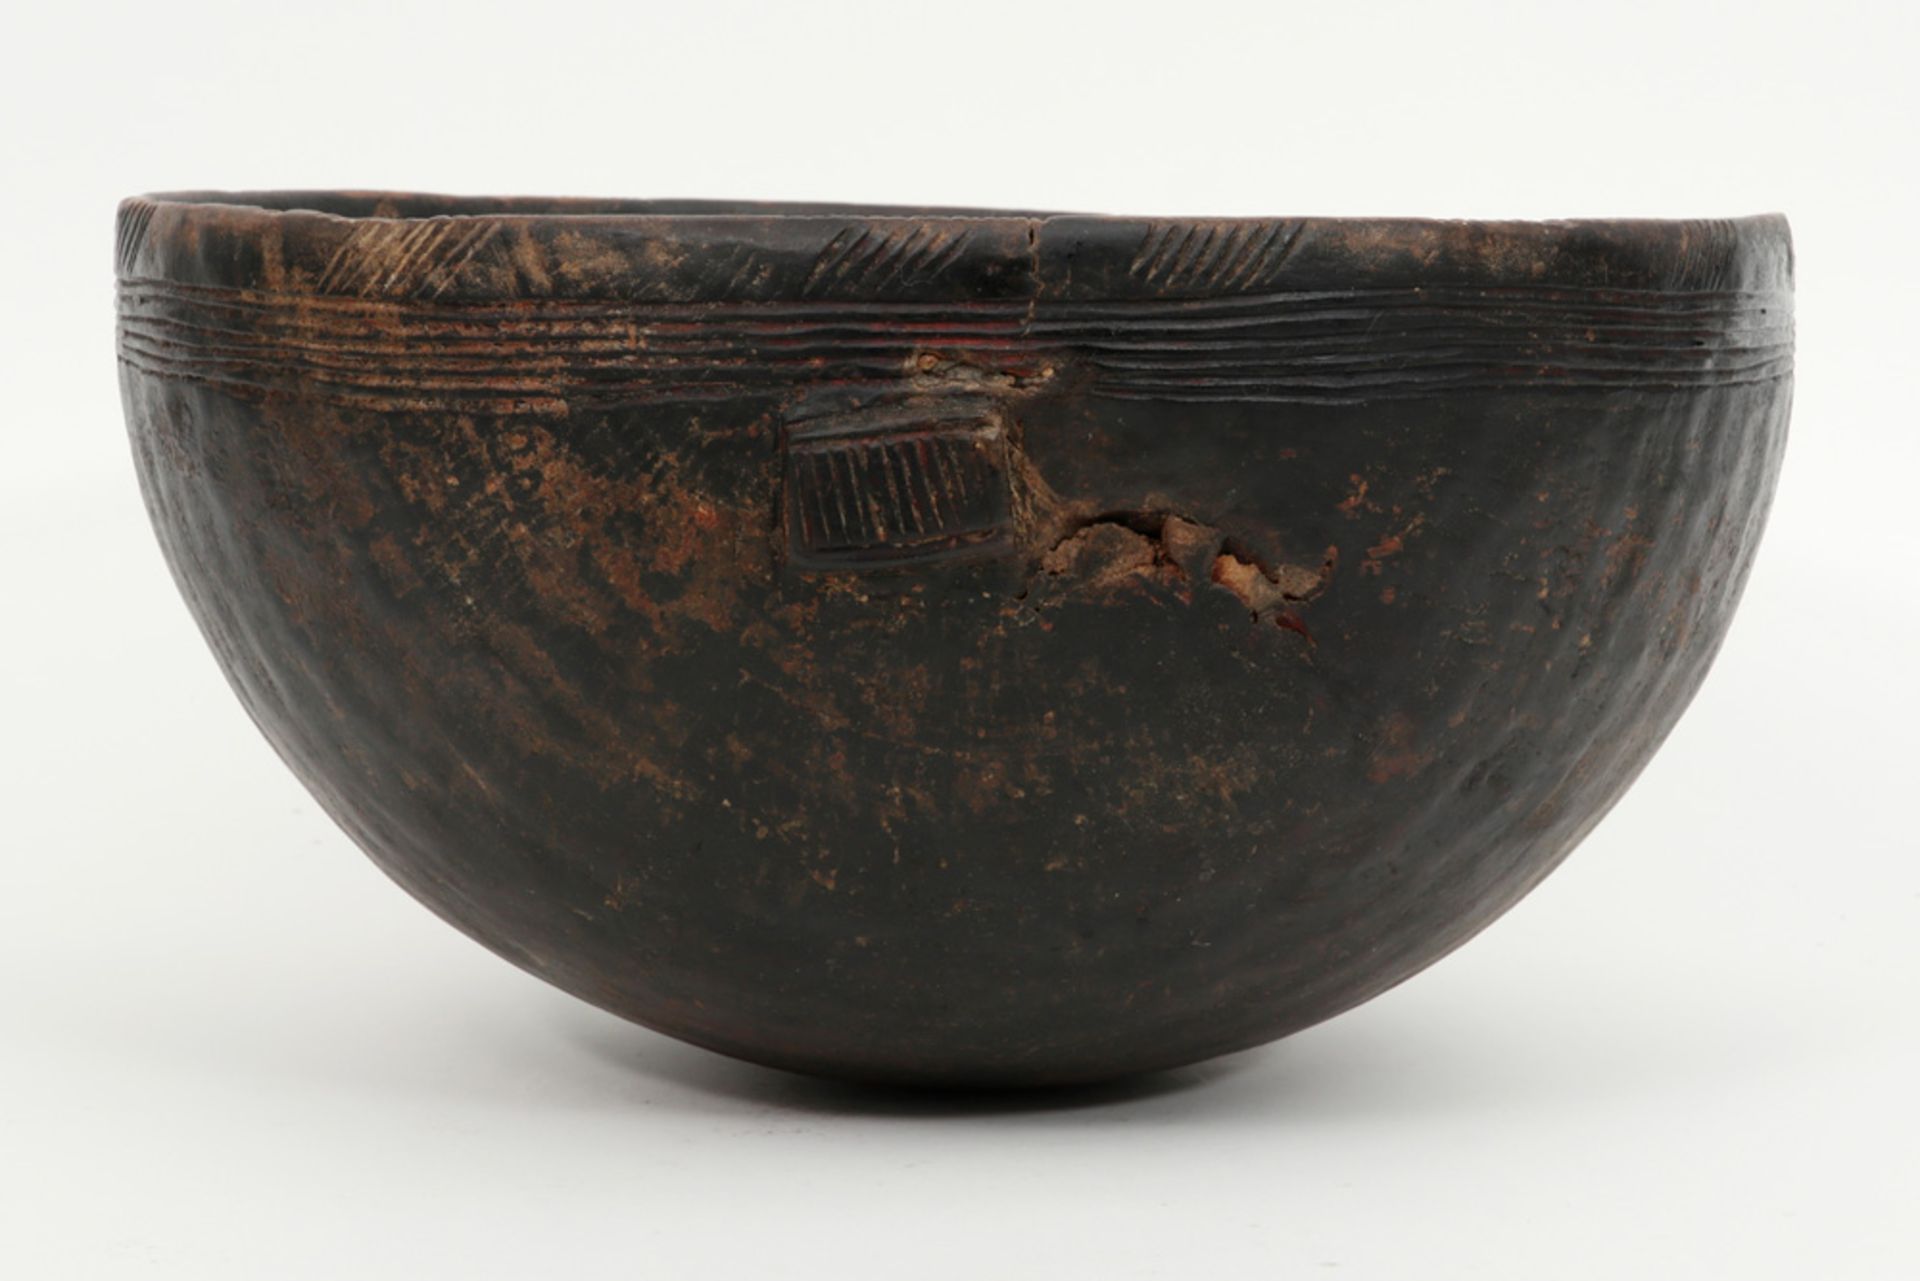 authentic Nigerain Nupe bowl in wood with typical carved ornamentation - Image 2 of 3